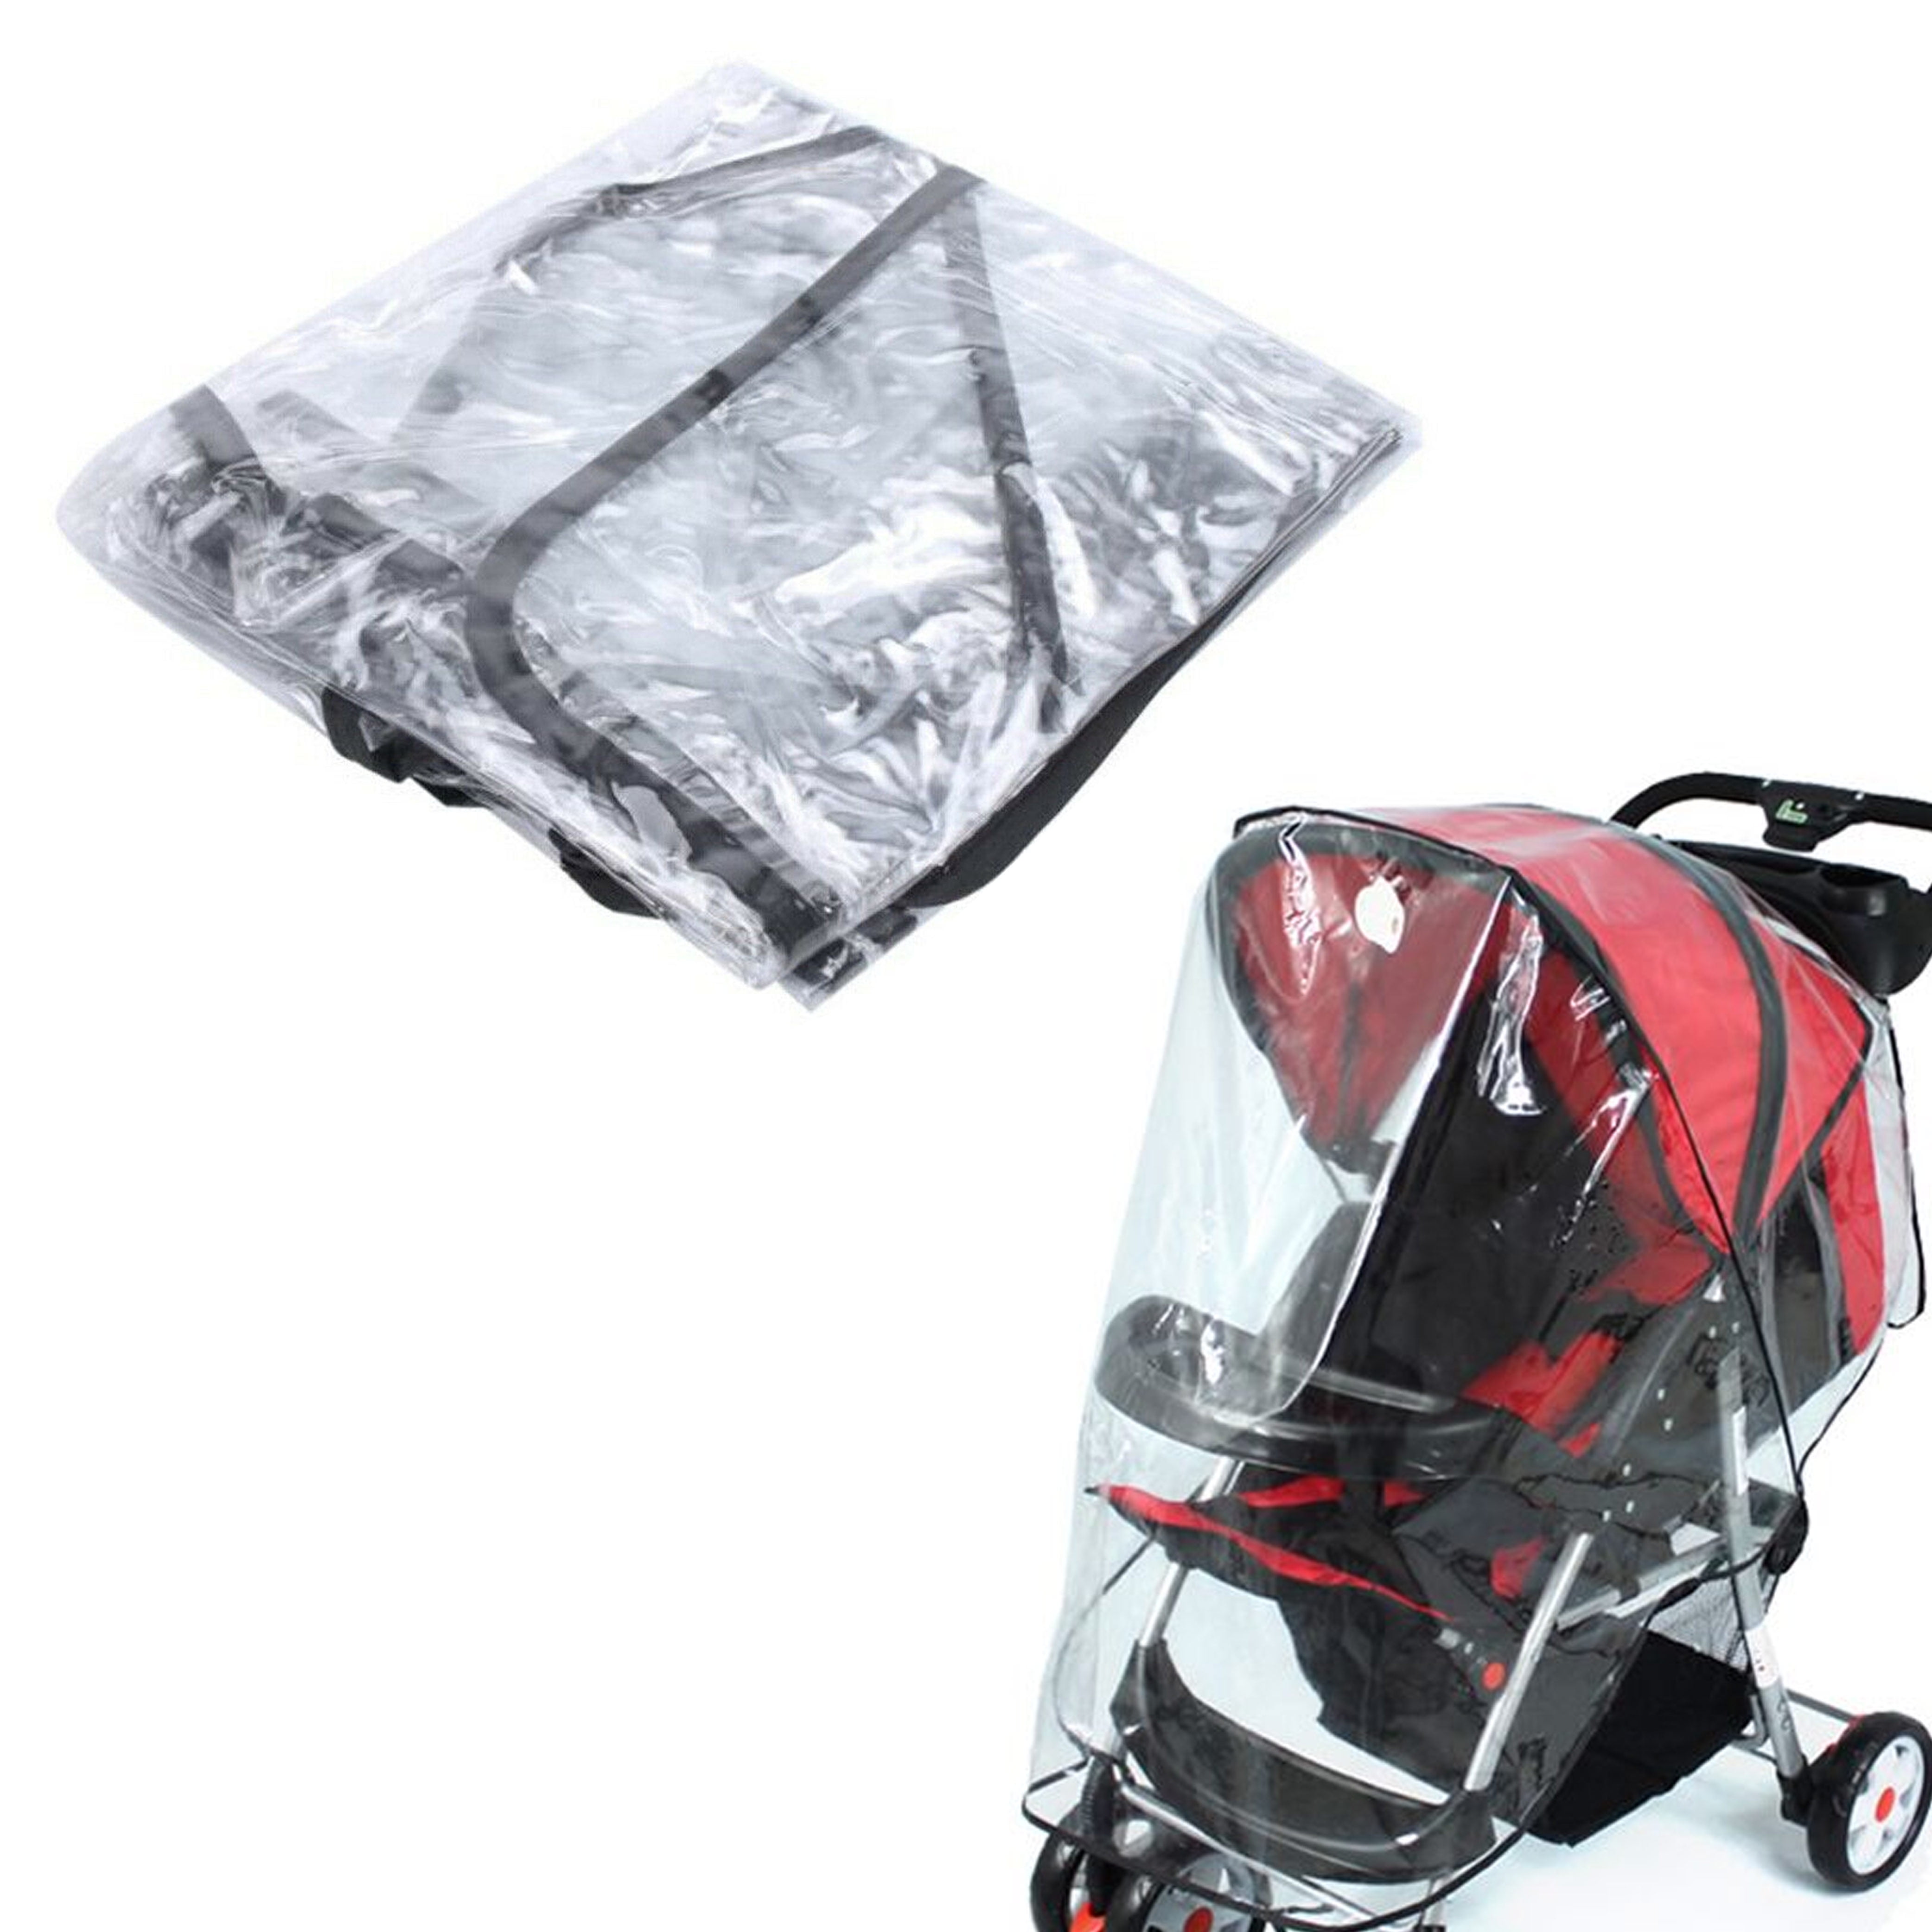 Baby Stroller Shield Waterproof Rain Cover Weather Snow Bug Canopy Universal Fit 